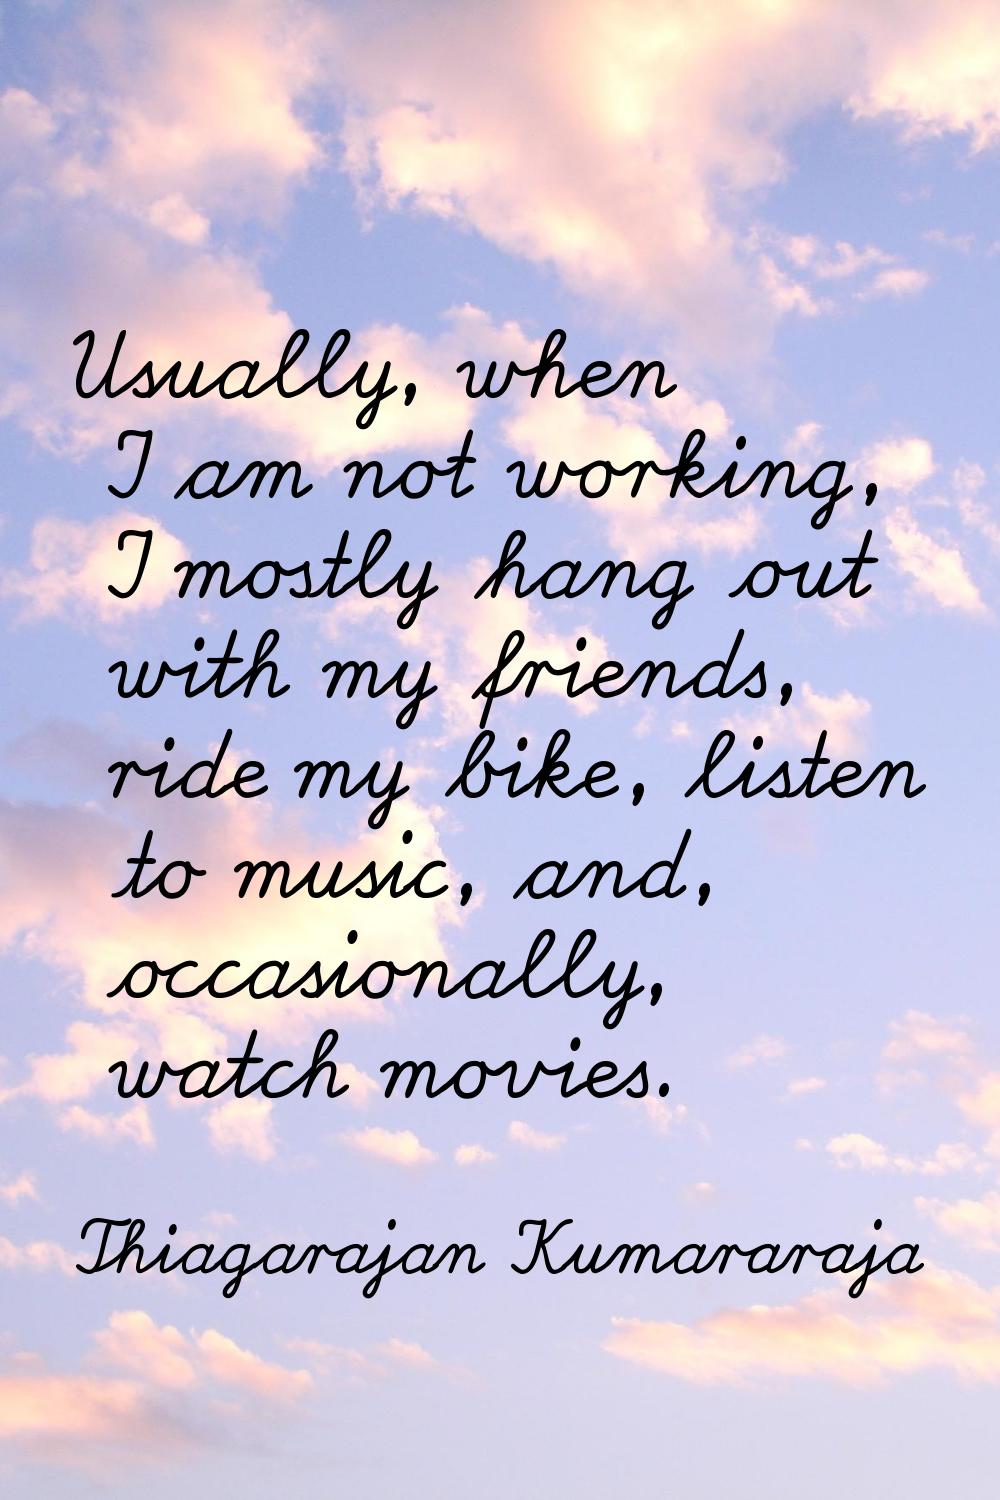 Usually, when I am not working, I mostly hang out with my friends, ride my bike, listen to music, a